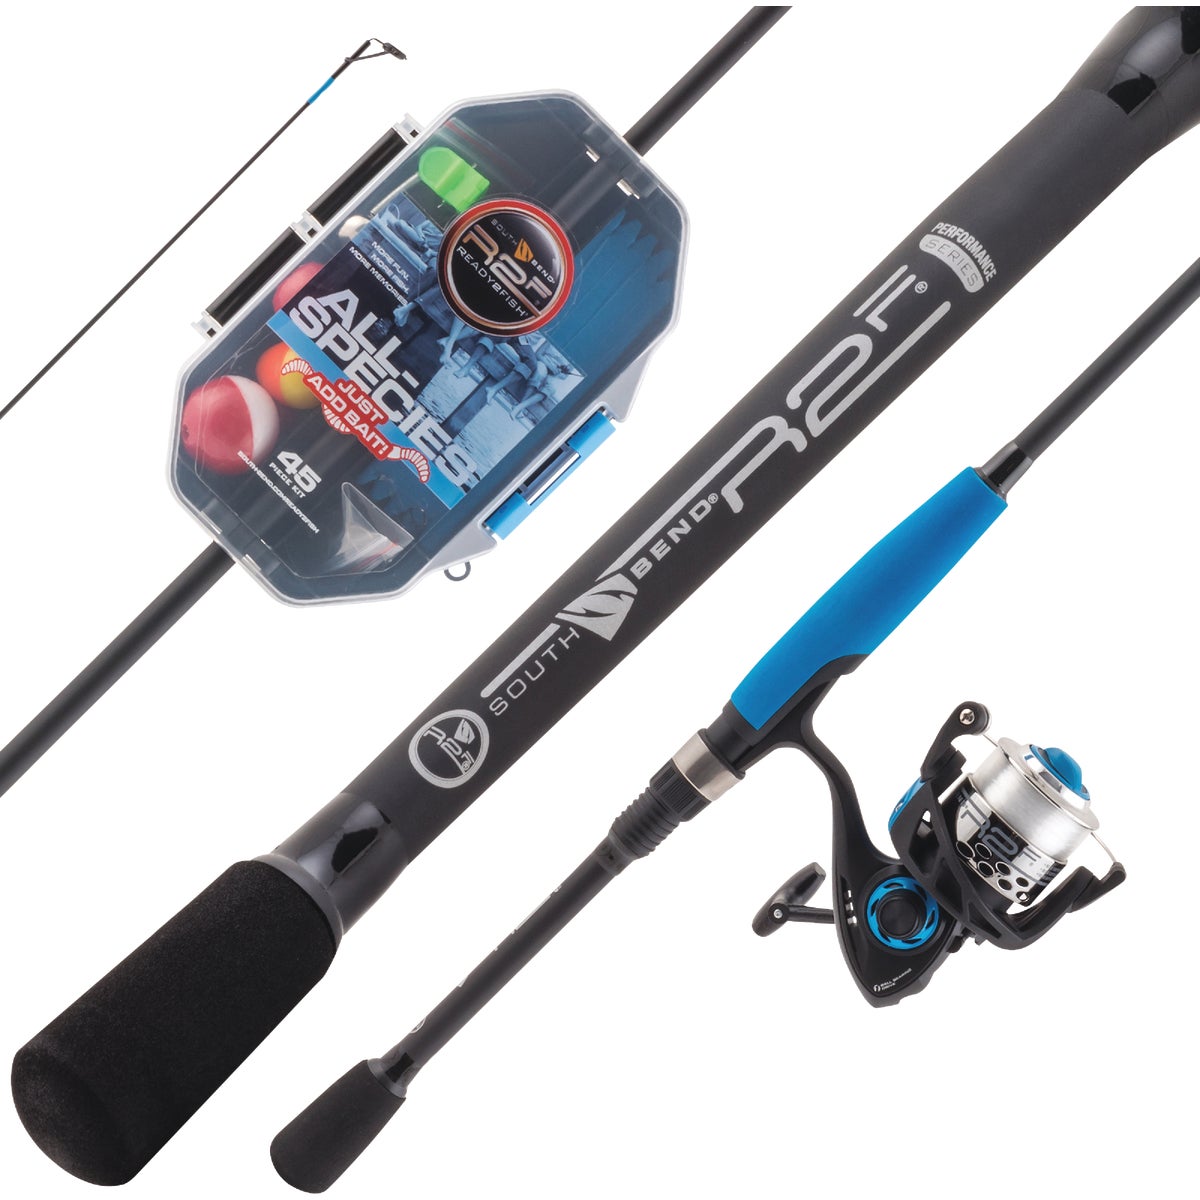 PENN Wrath Spinning Reel and Fishing Rod Combo